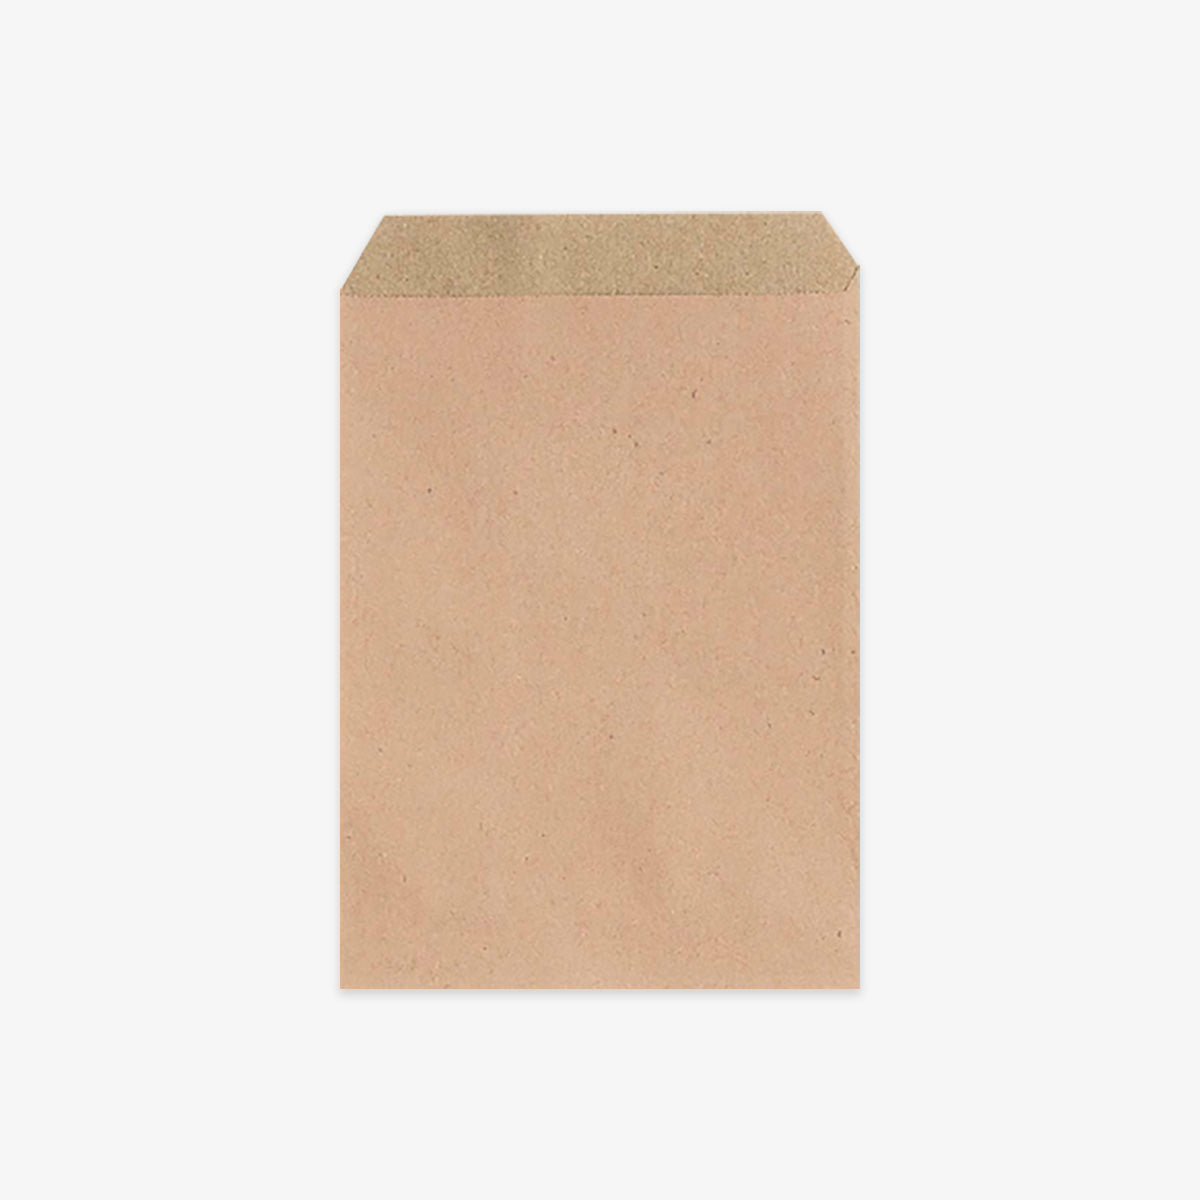 NUDE PAPER GIFT BAG // L